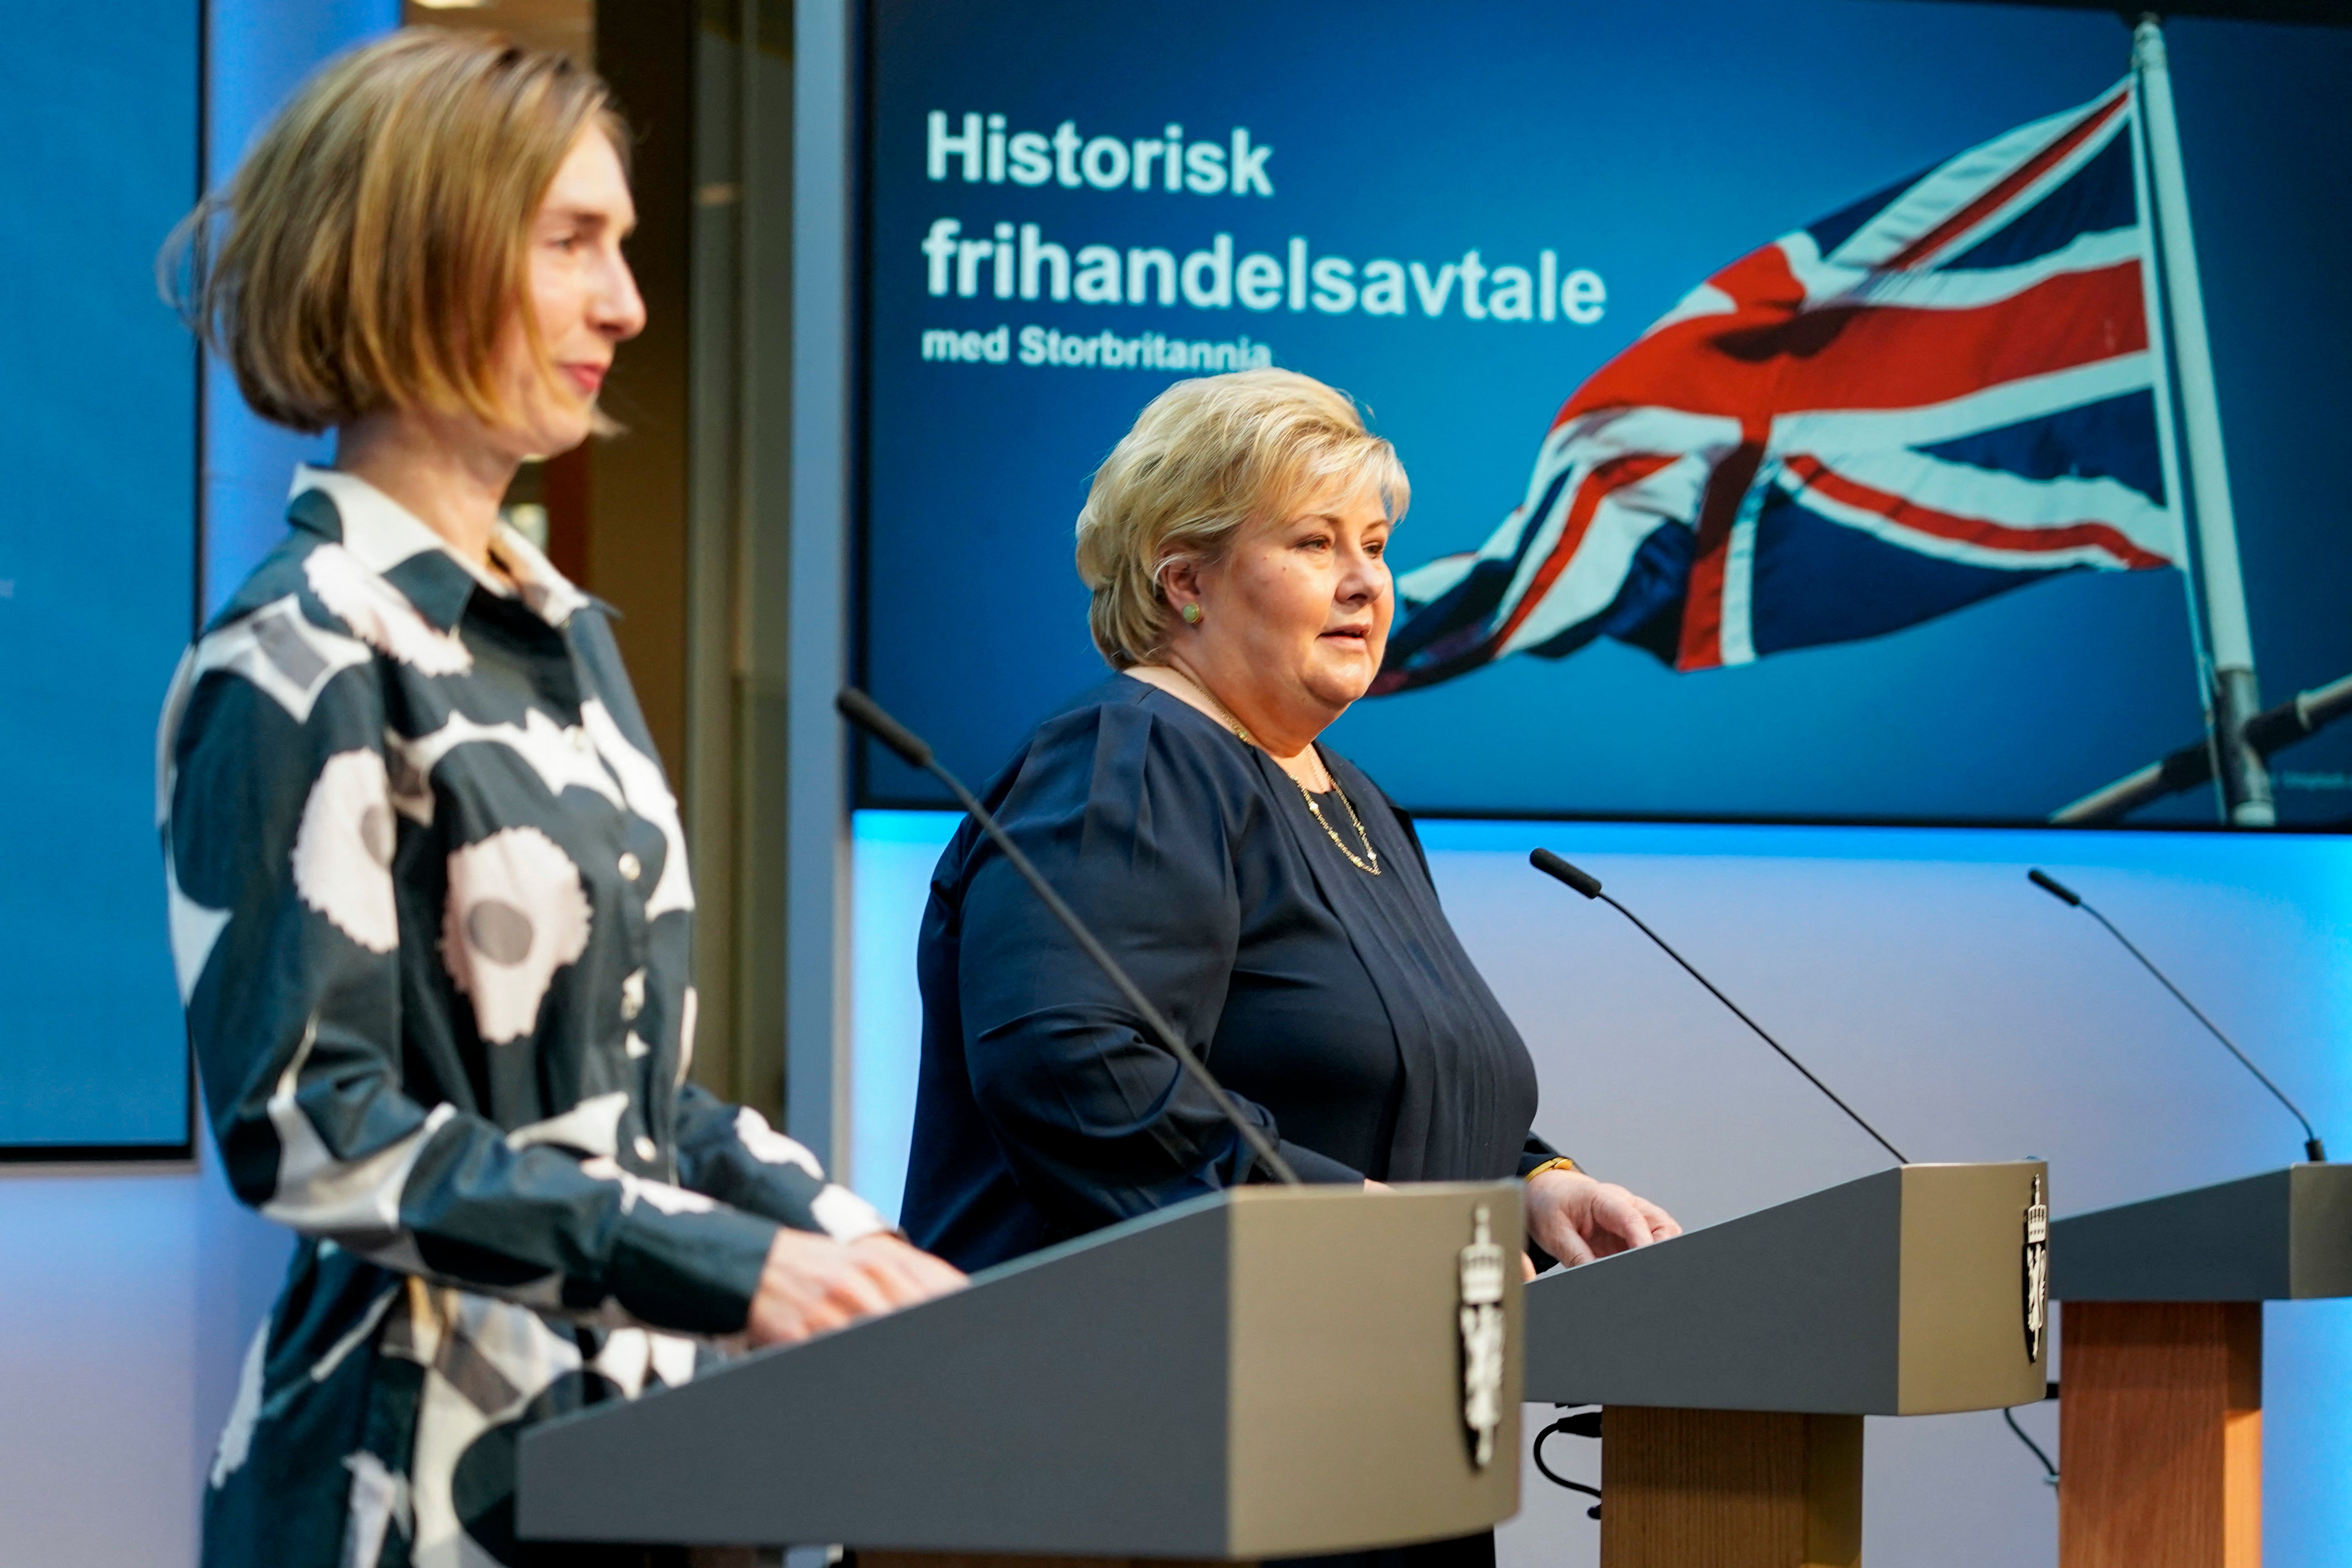 Norwegian Prime Minister Erna Solberg and Norwegian Minister of Trade and Industry Iselin Nybø address a press conference on trade with the UK